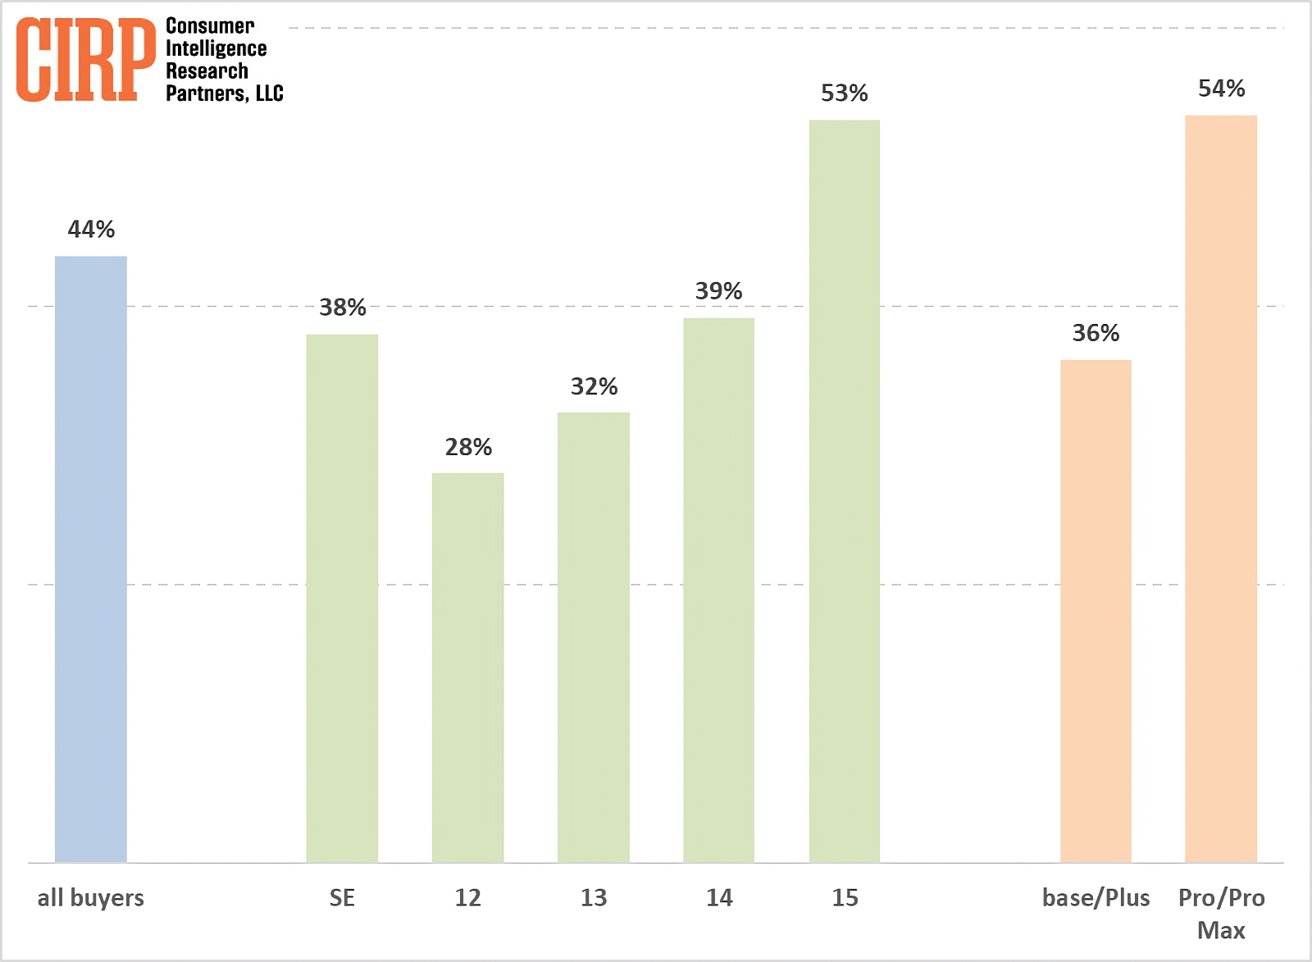 Bar chart showing percentages of consumer choices for different product models ranging from 28% to 54%.